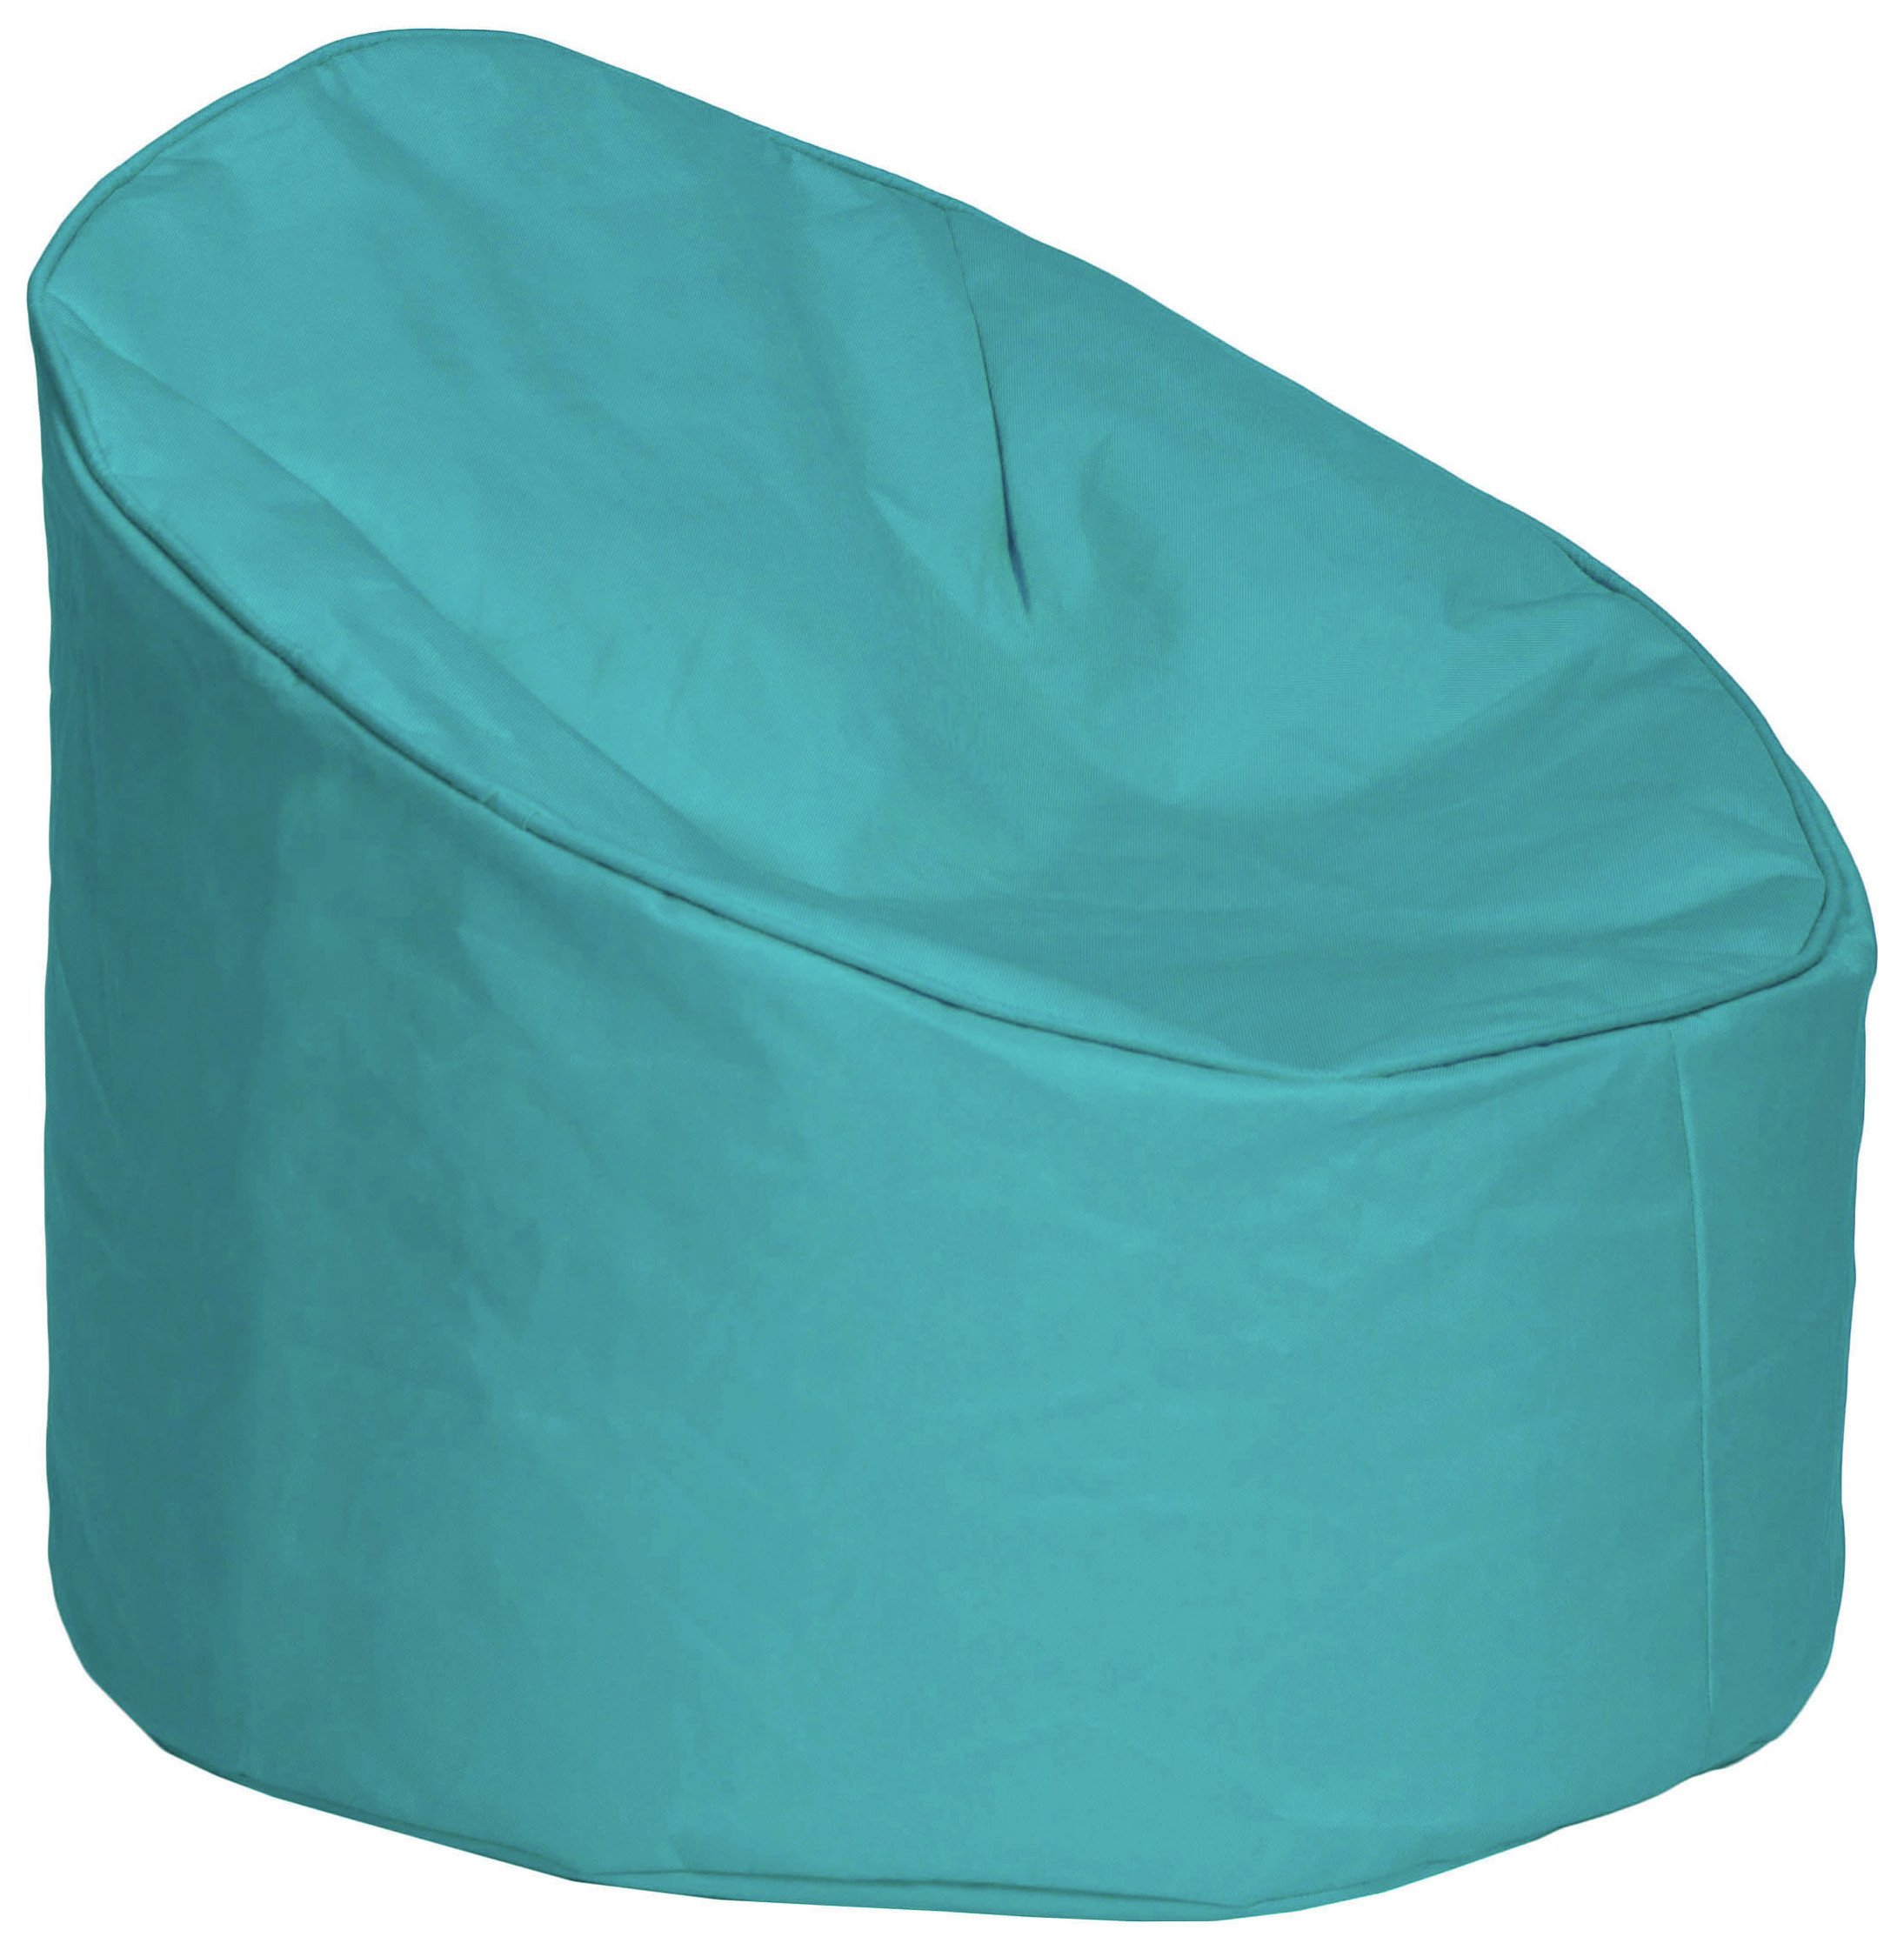 Kaikoo Cool Chill Chair - Turquoise